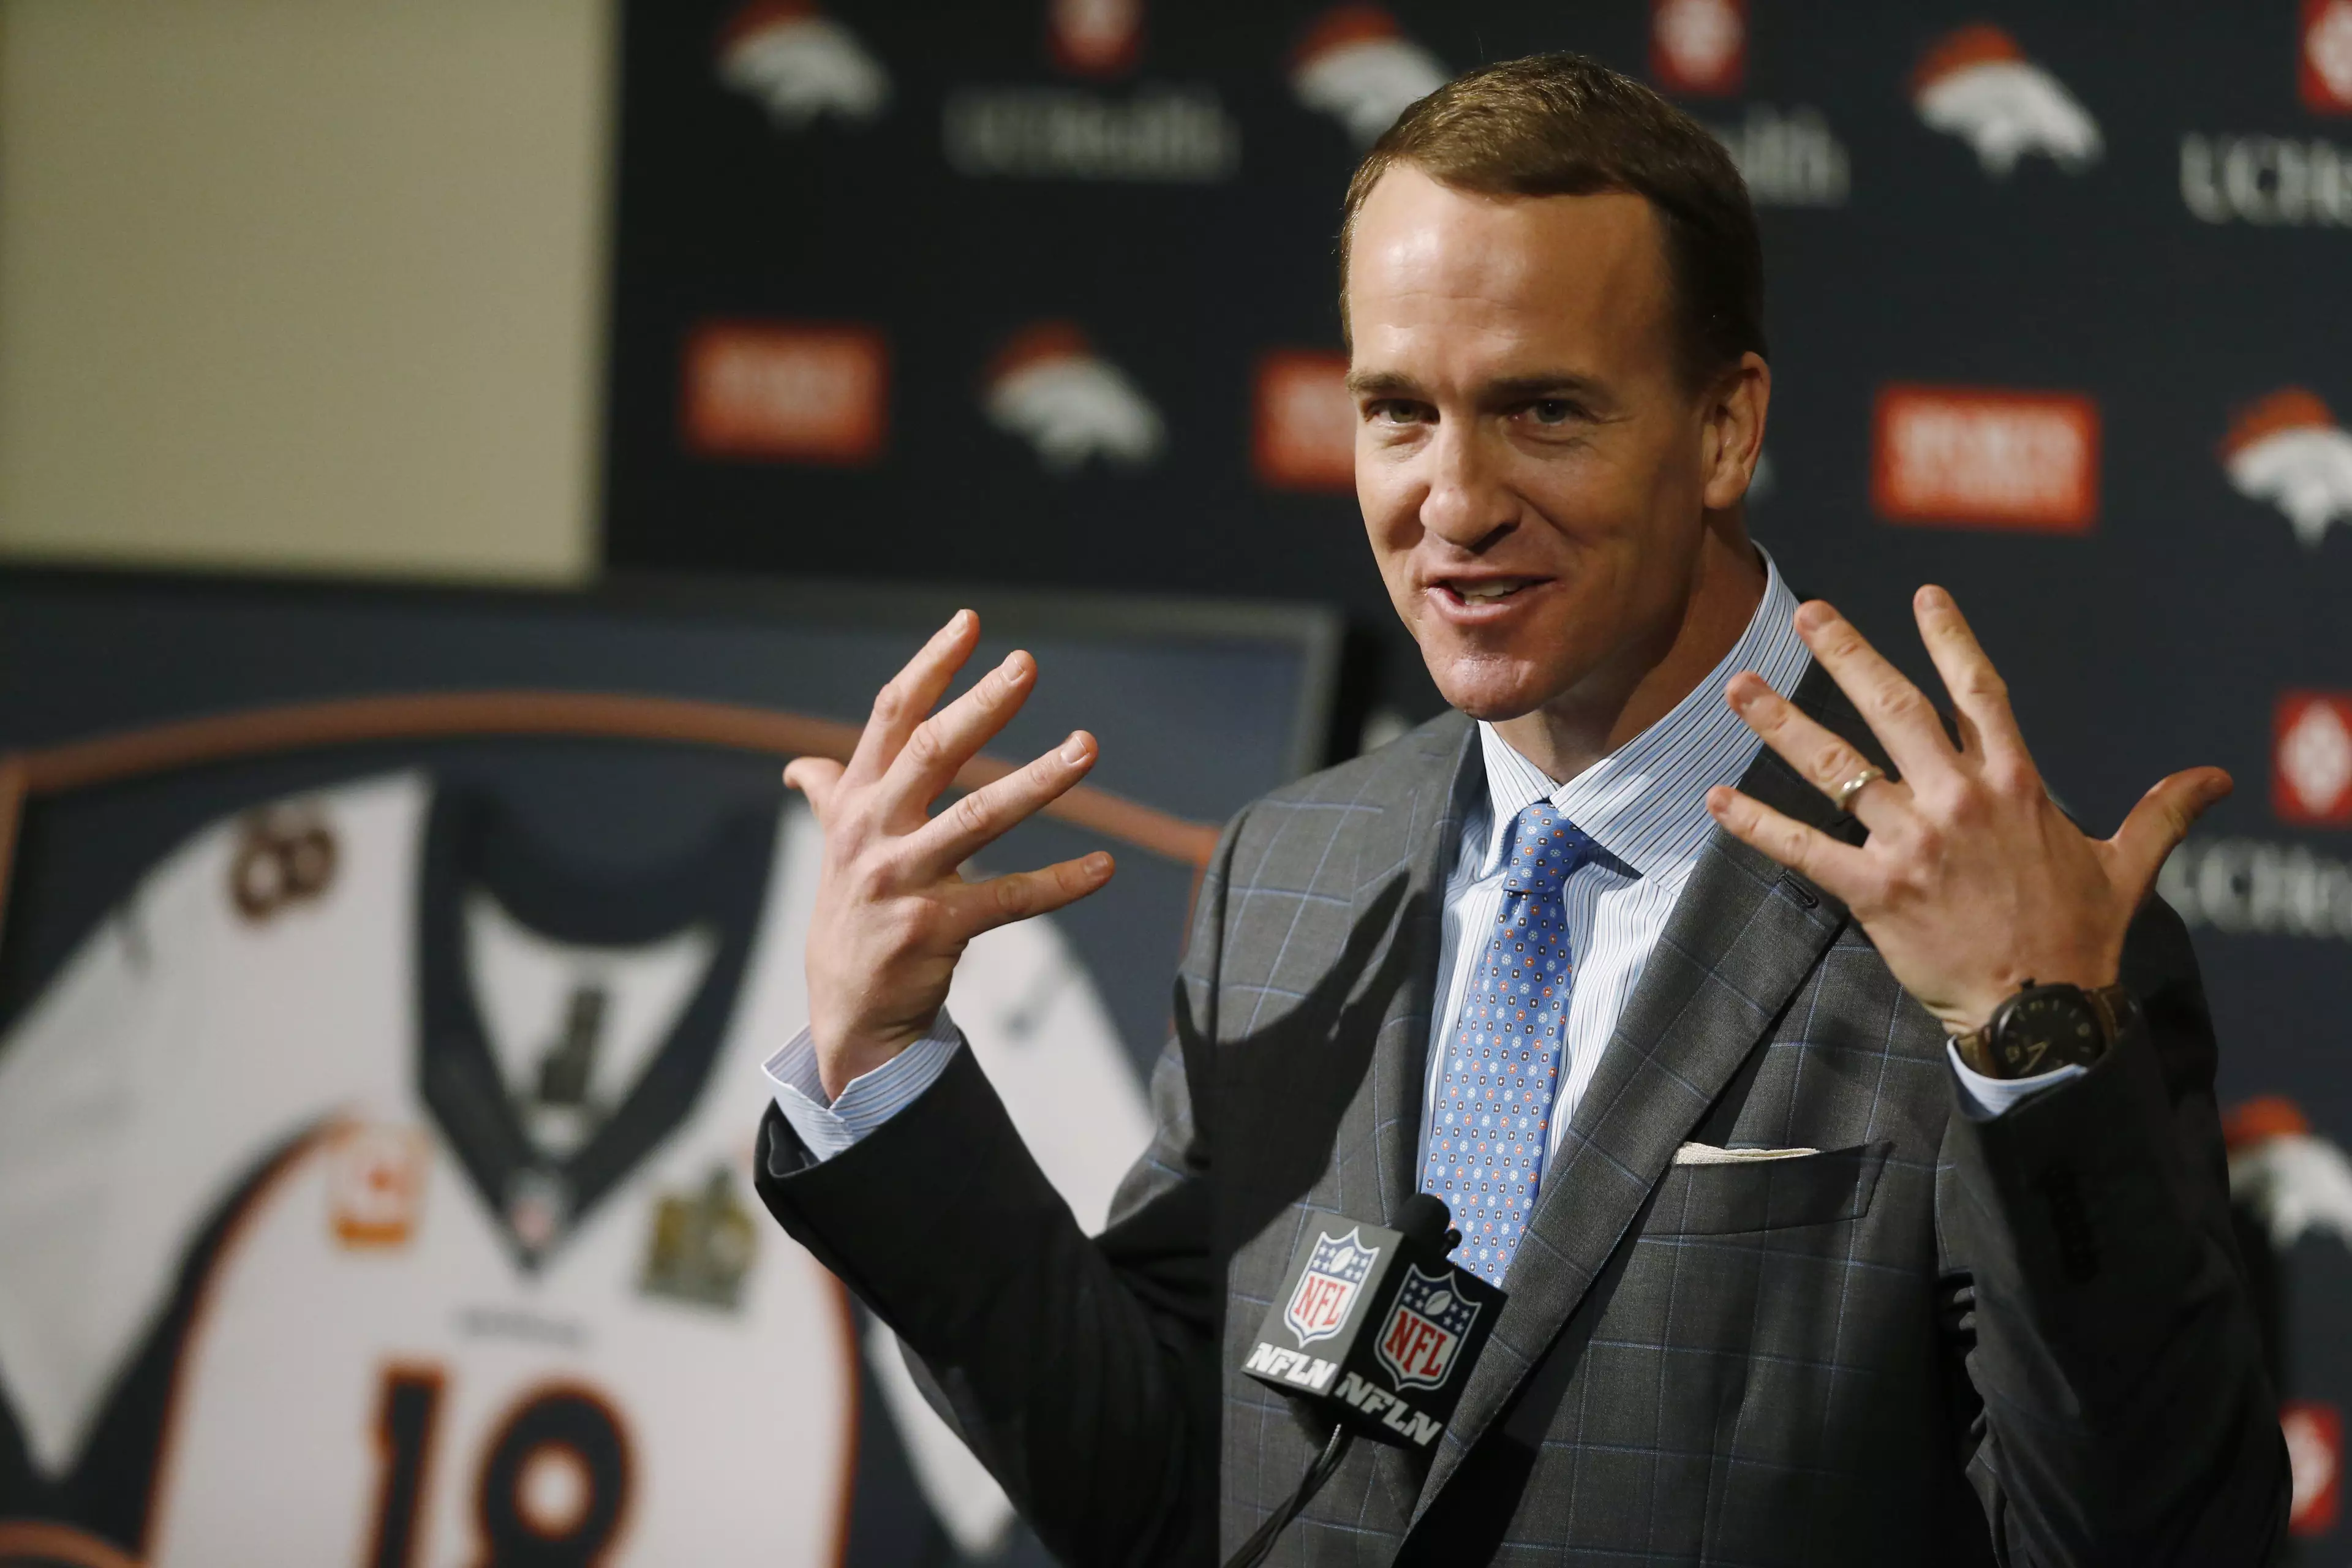 Peyton Manning Cleared Of Any PED Use Following NFL Investigation 